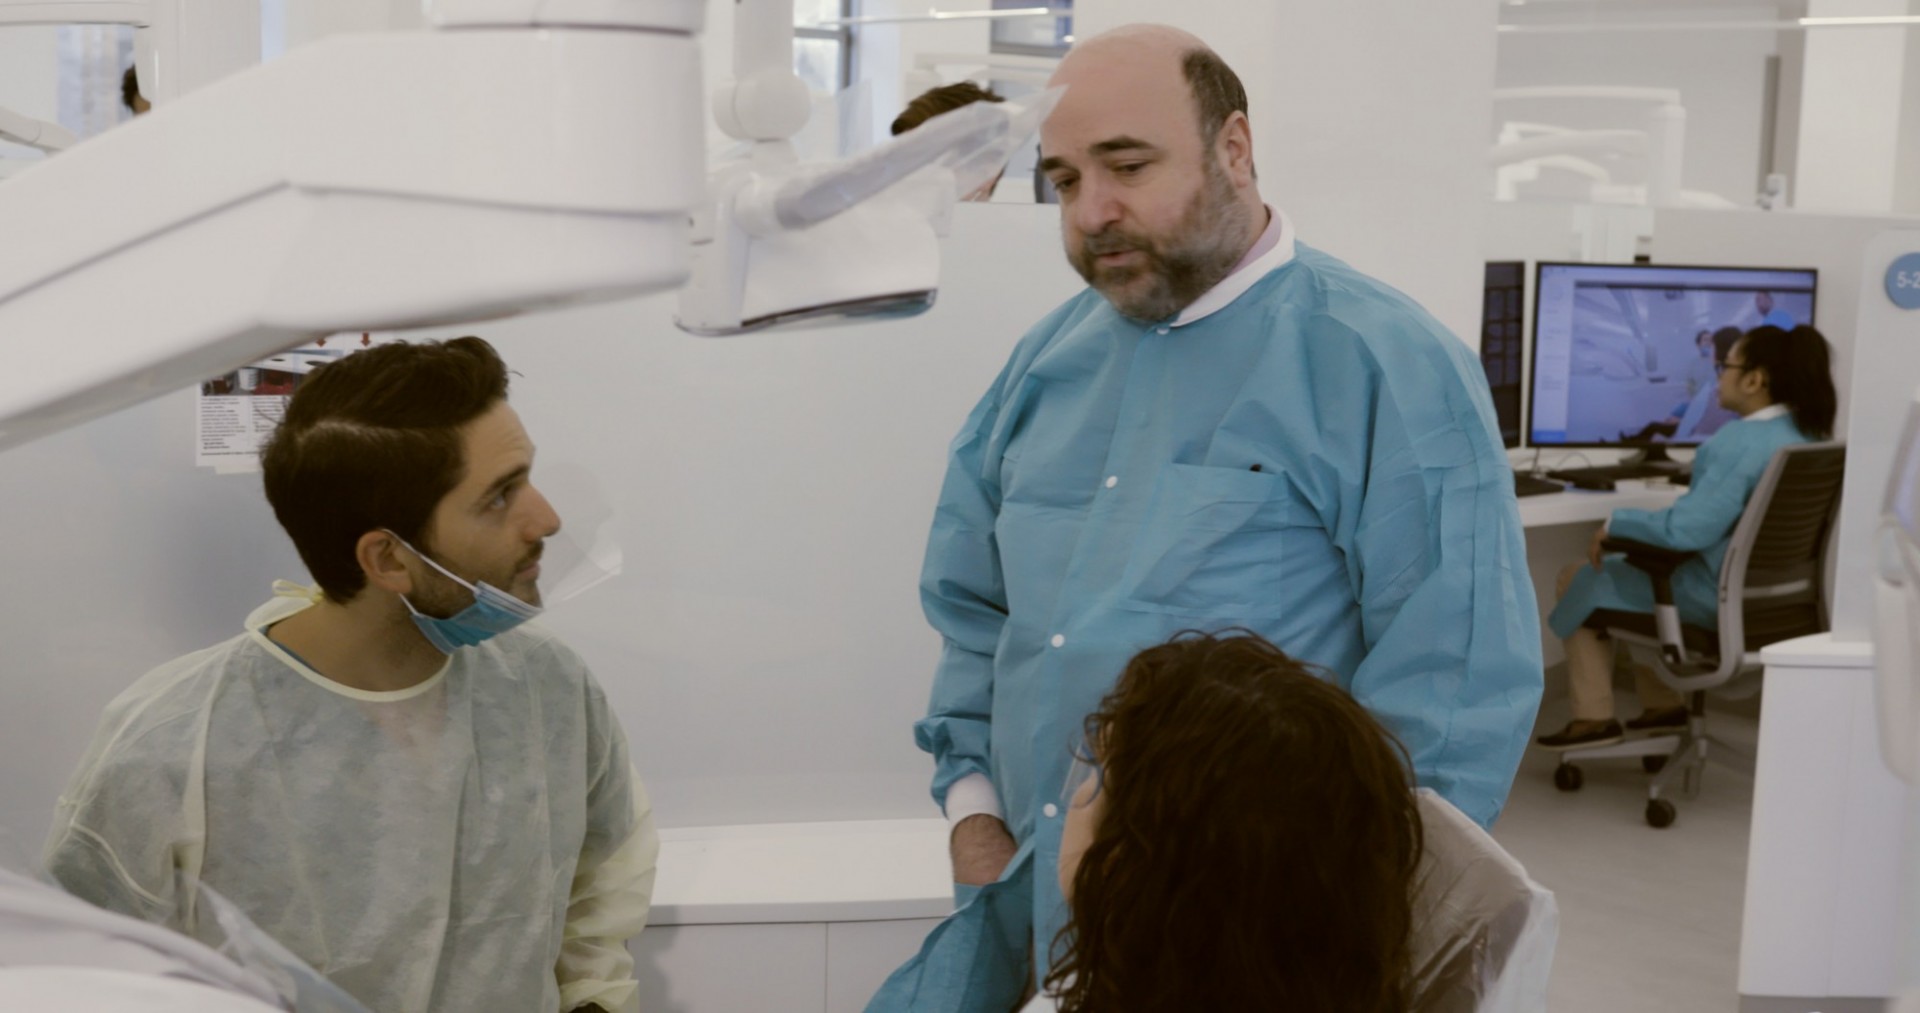 A dentists speaks to a patient